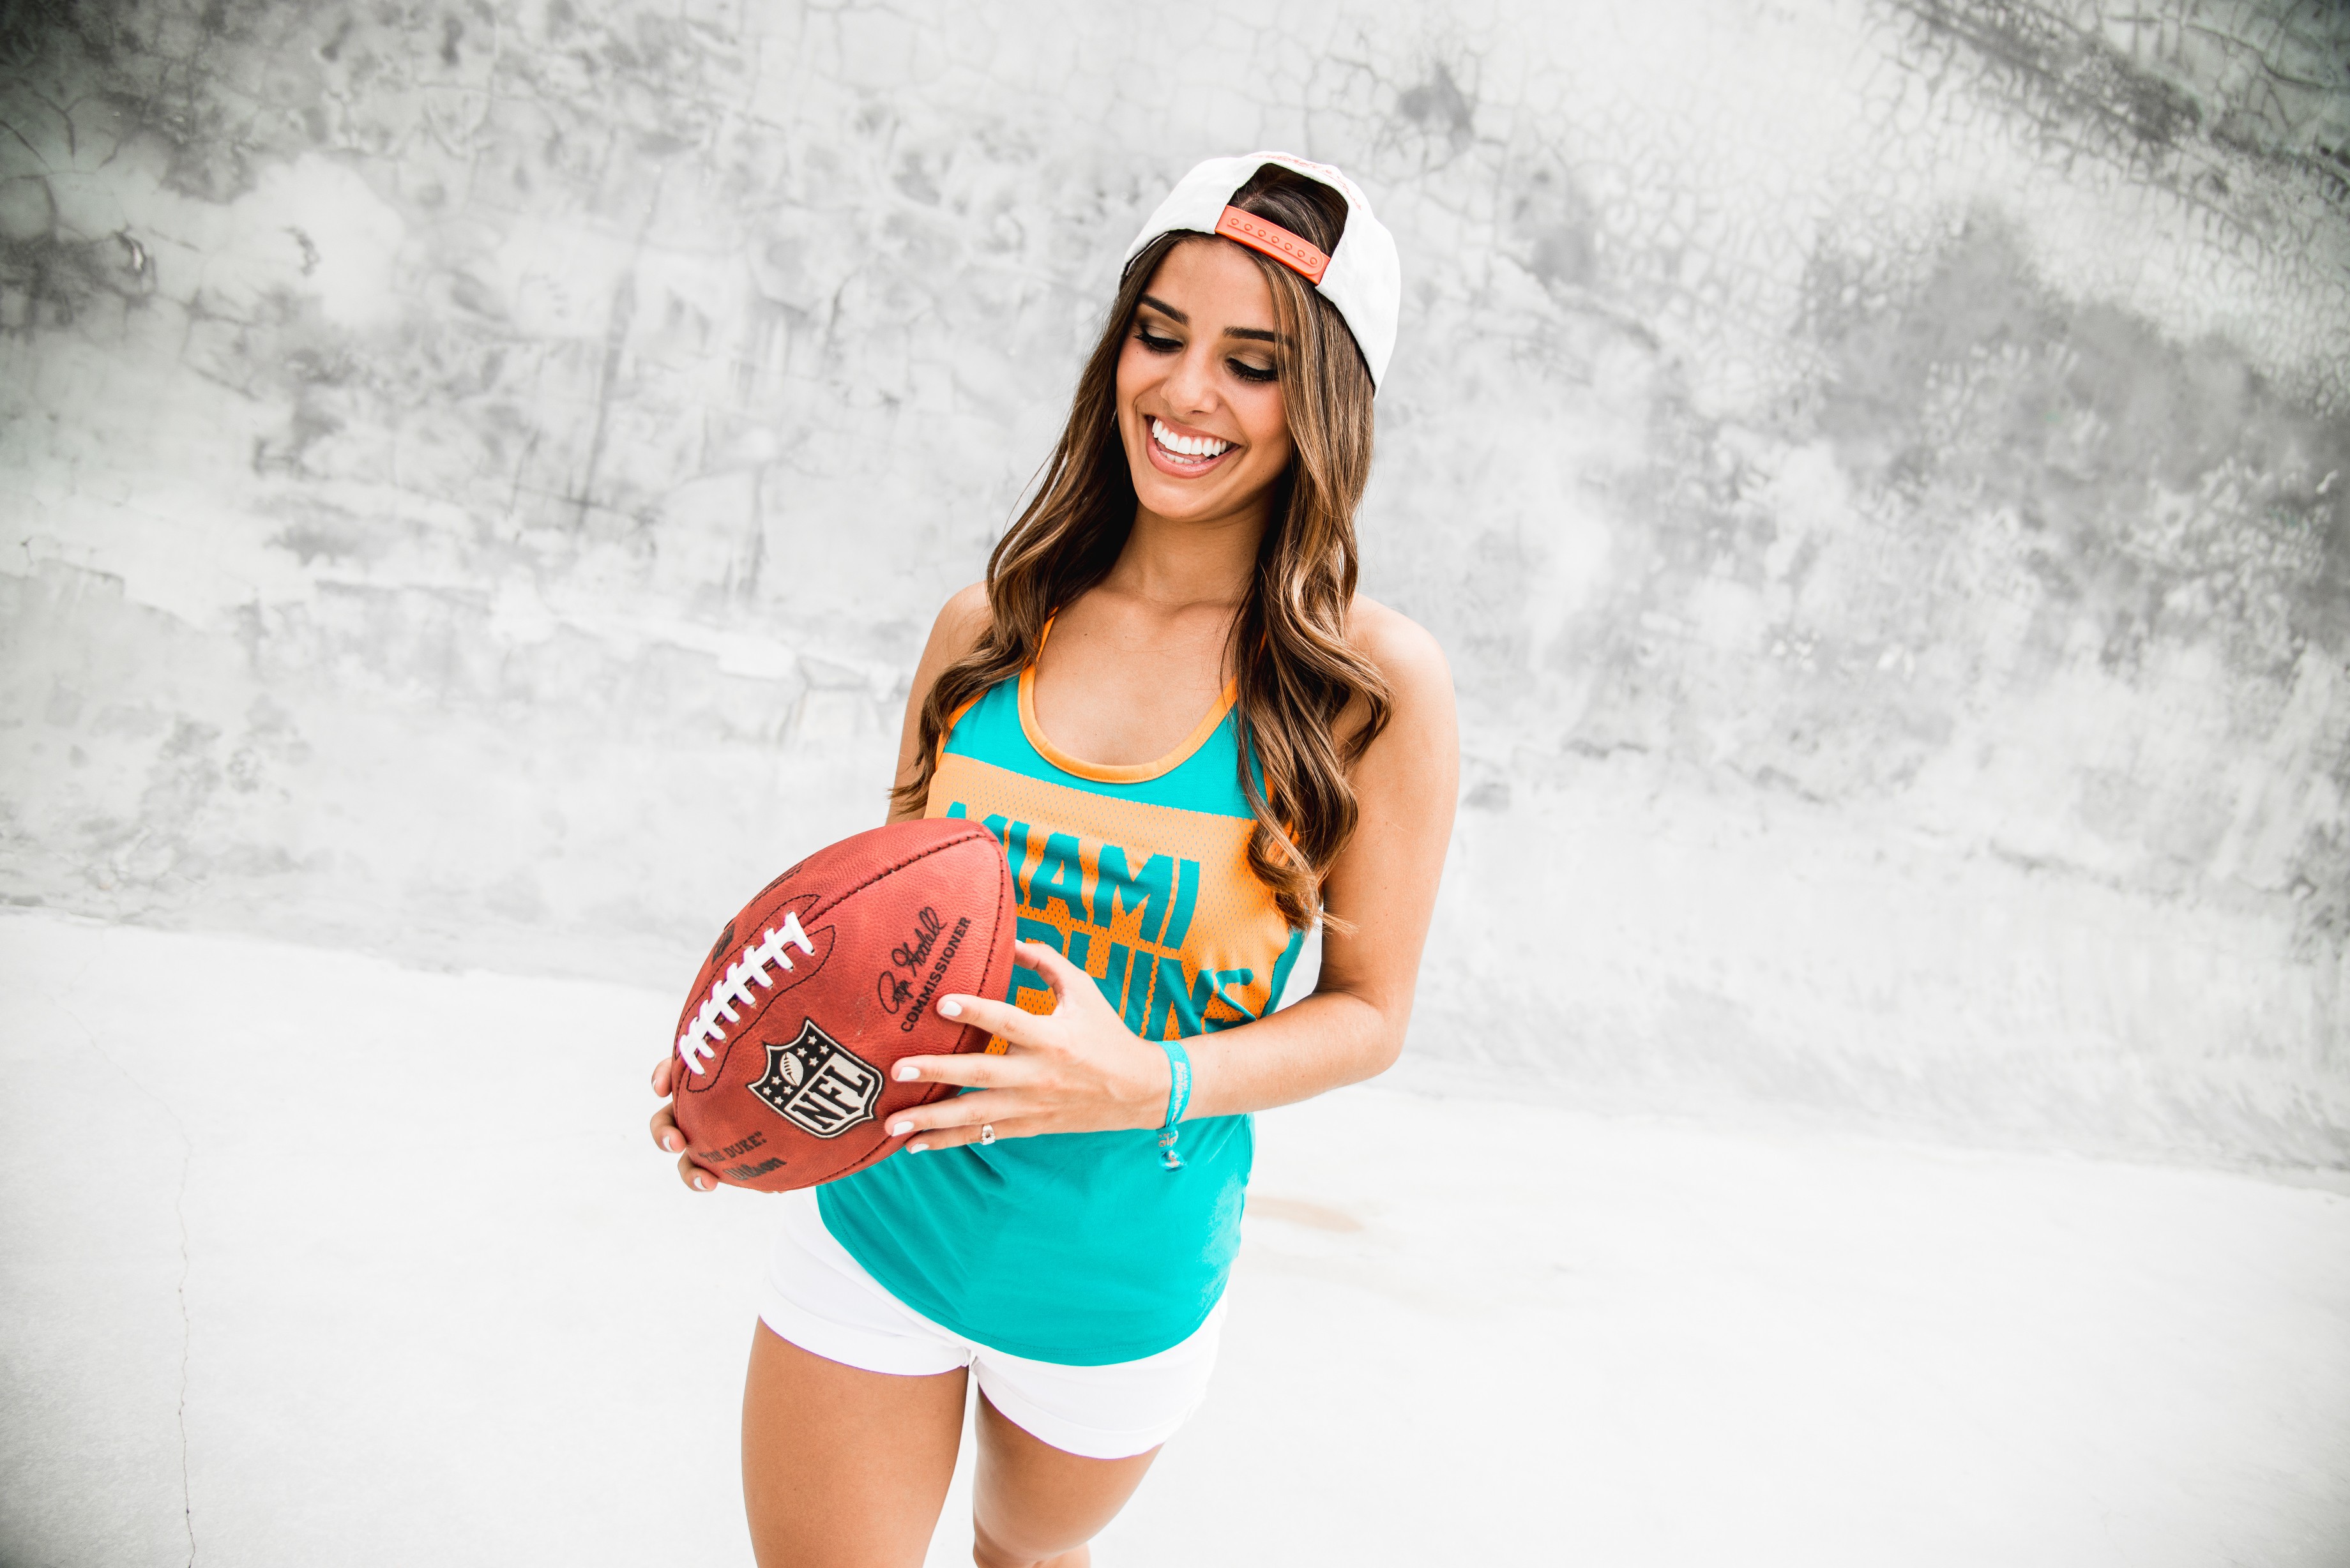 People 3680x2456 ball women model NFL printed shirts hat women with hats smiling